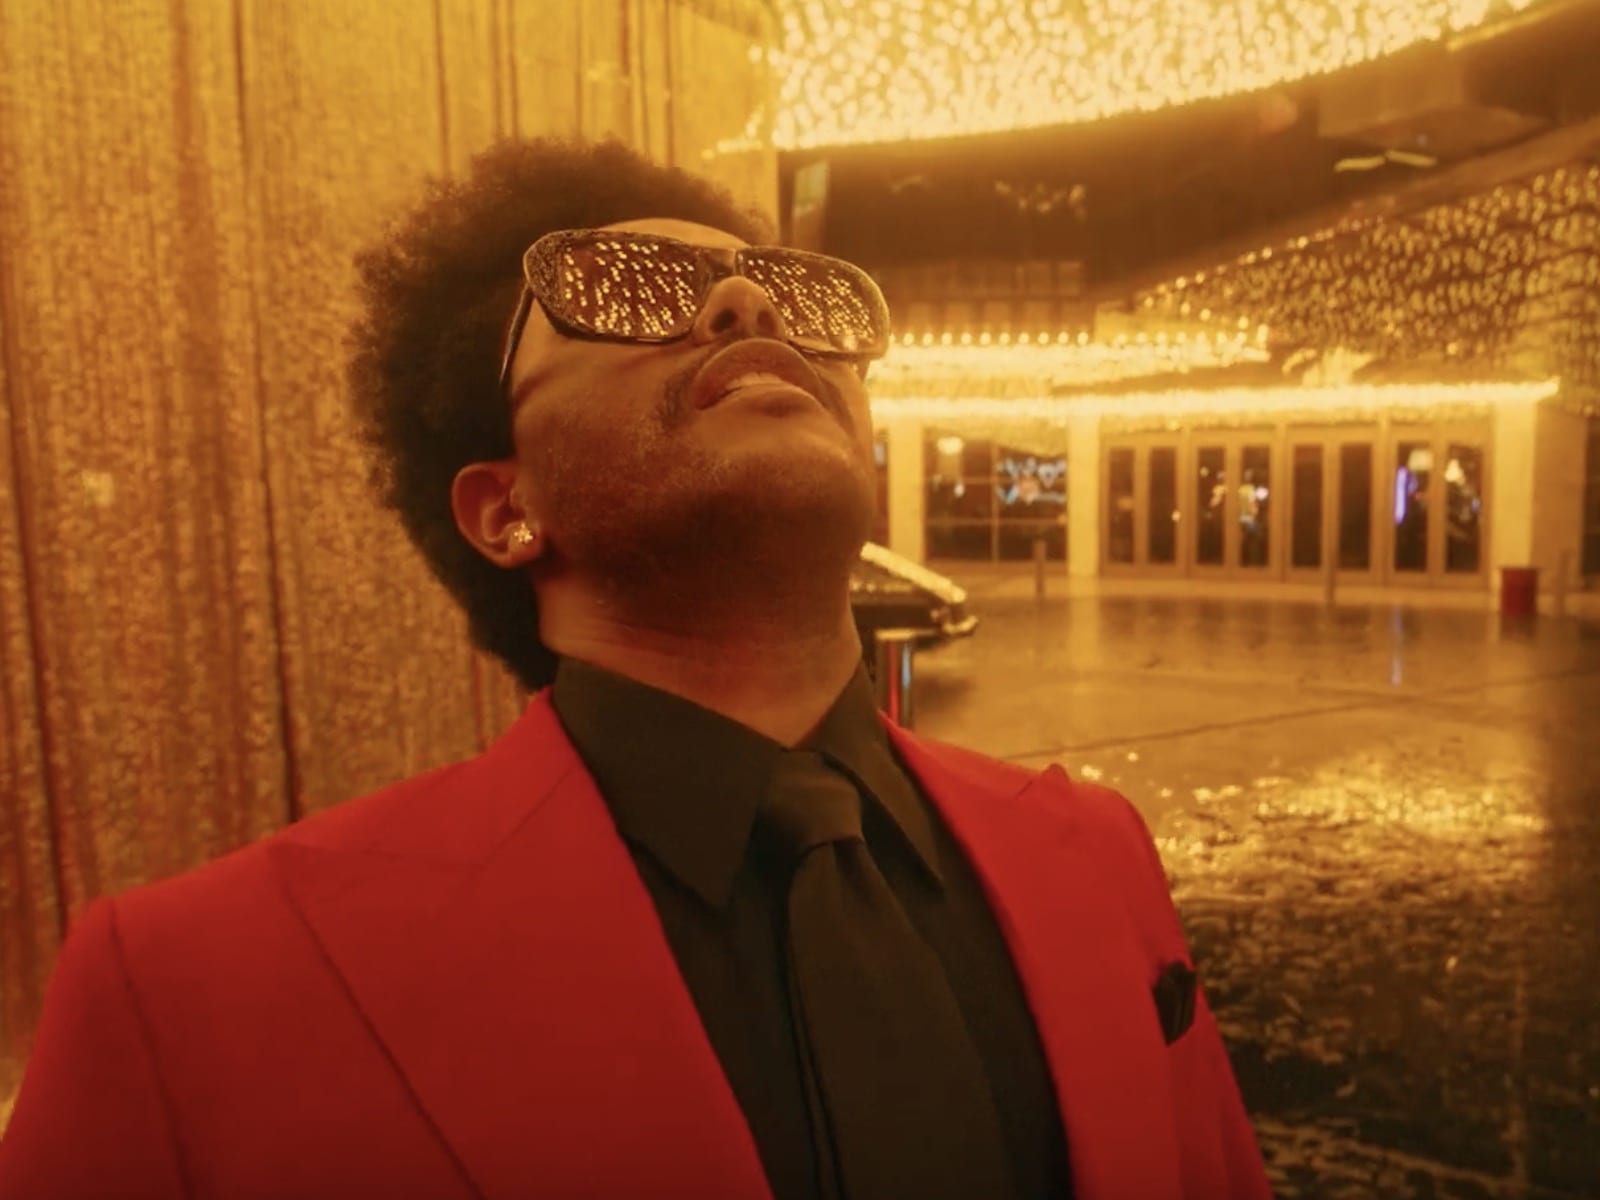 Watch: The Weeknd Hits The Strip In New HEARTLESS Video1600 x 1200